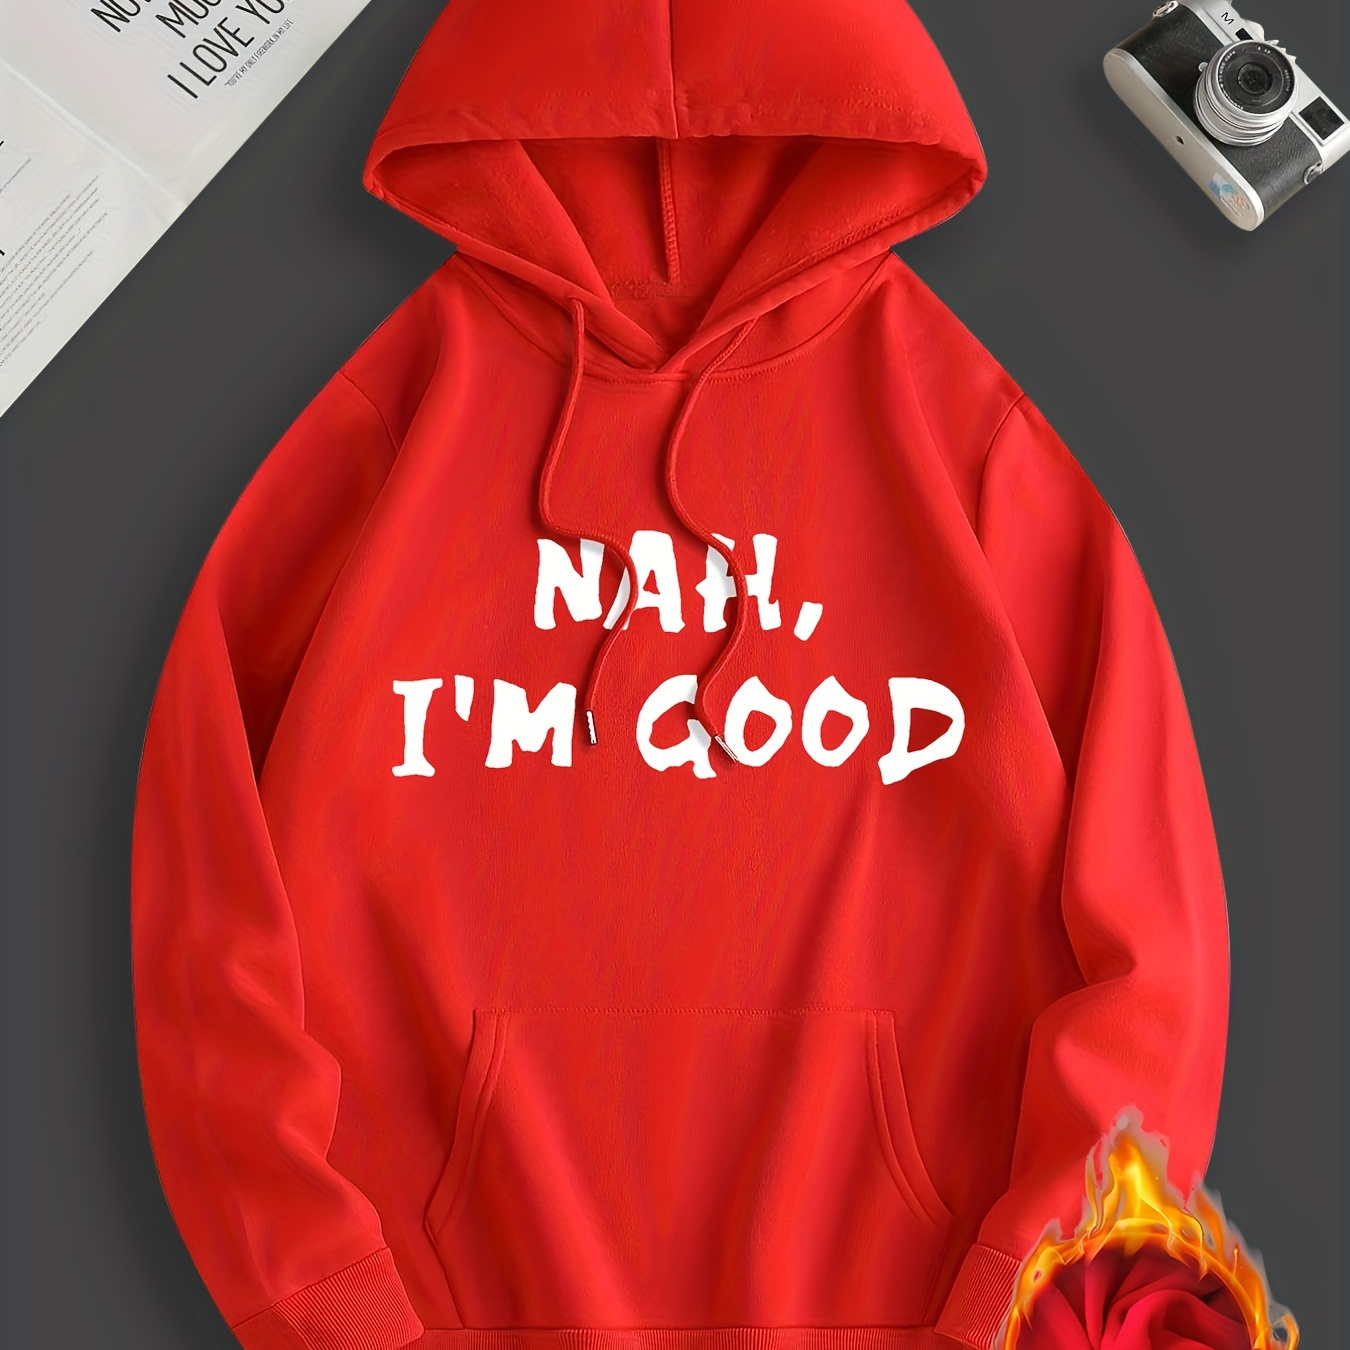 

I'm Good Print Hoodie, Cool Hoodies For Men, Men's Casual Graphic Design Pullover Hooded Sweatshirt With Kangaroo Pocket Streetwear For Winter Fall, As Gifts